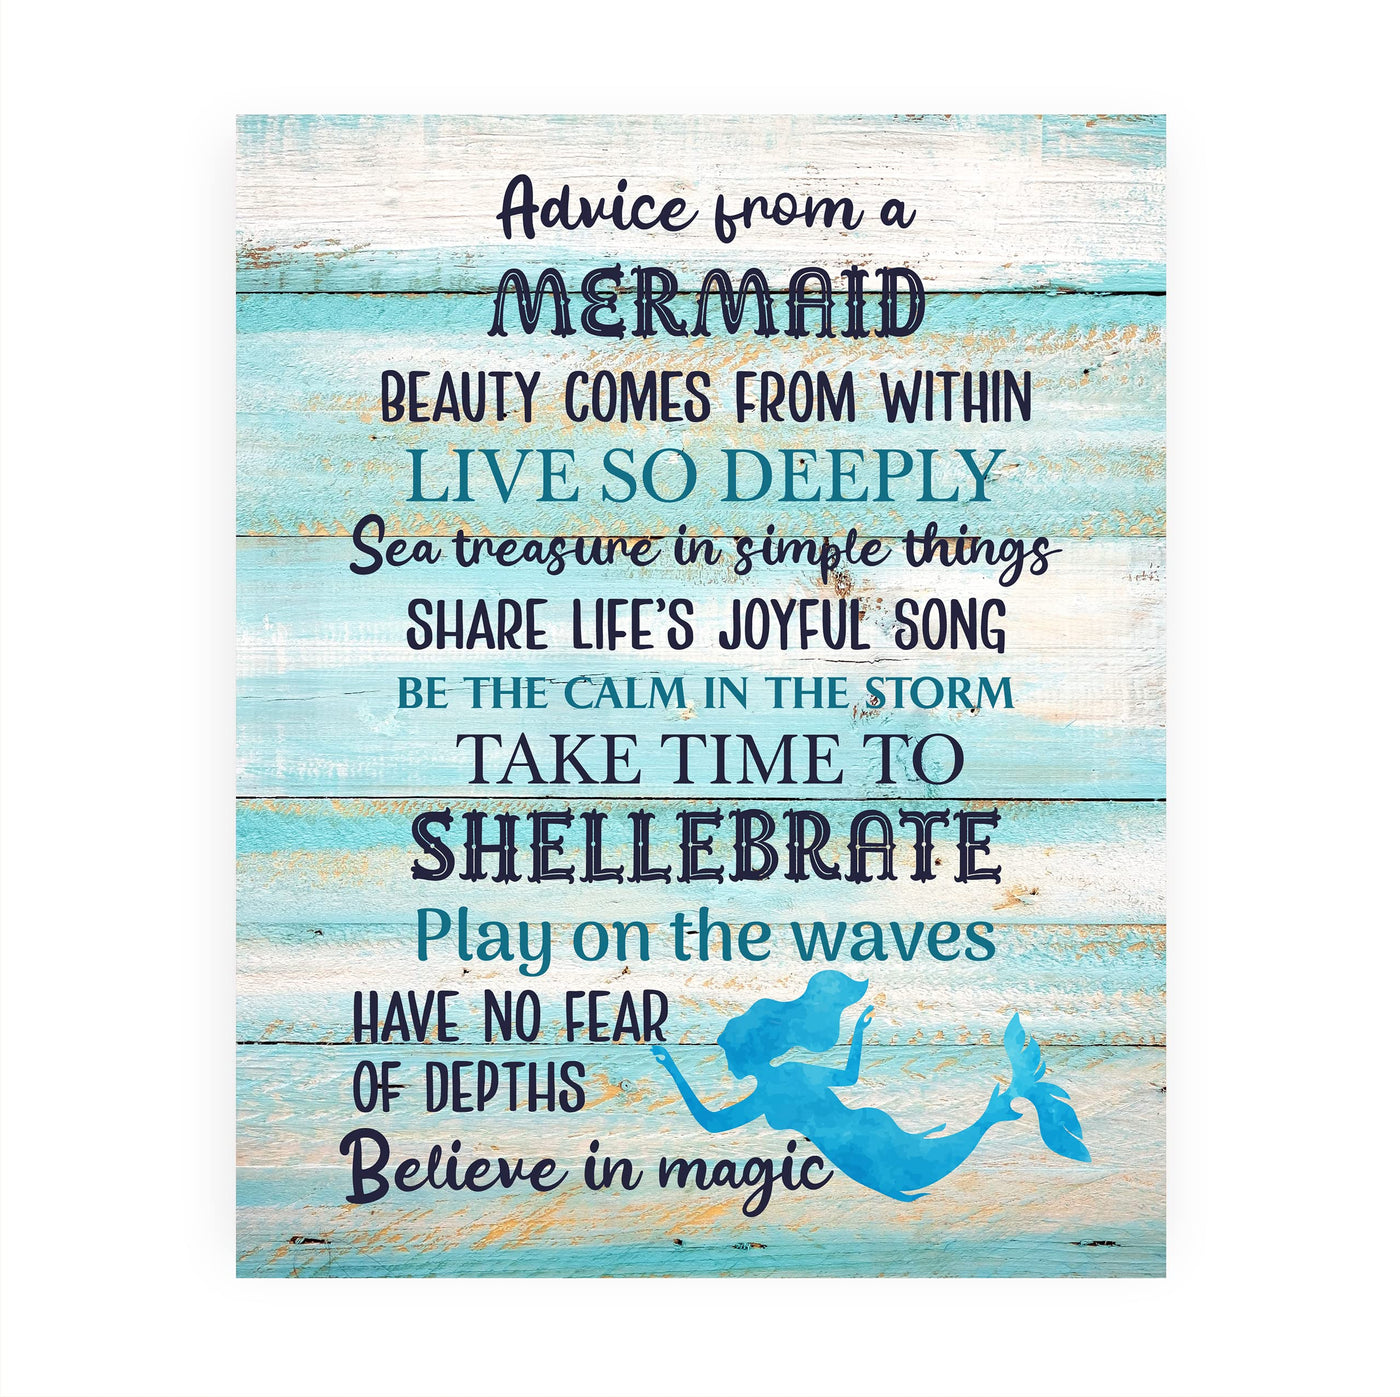 Advice From a Mermaid Inspirational Beach Wall Decor -8 x 10" Rustic Ocean Themed Art Print w/Distressed Wood Design -Ready to Frame. Home-Girls Bedroom-Nautical Decor. Perfect for the Beach House!